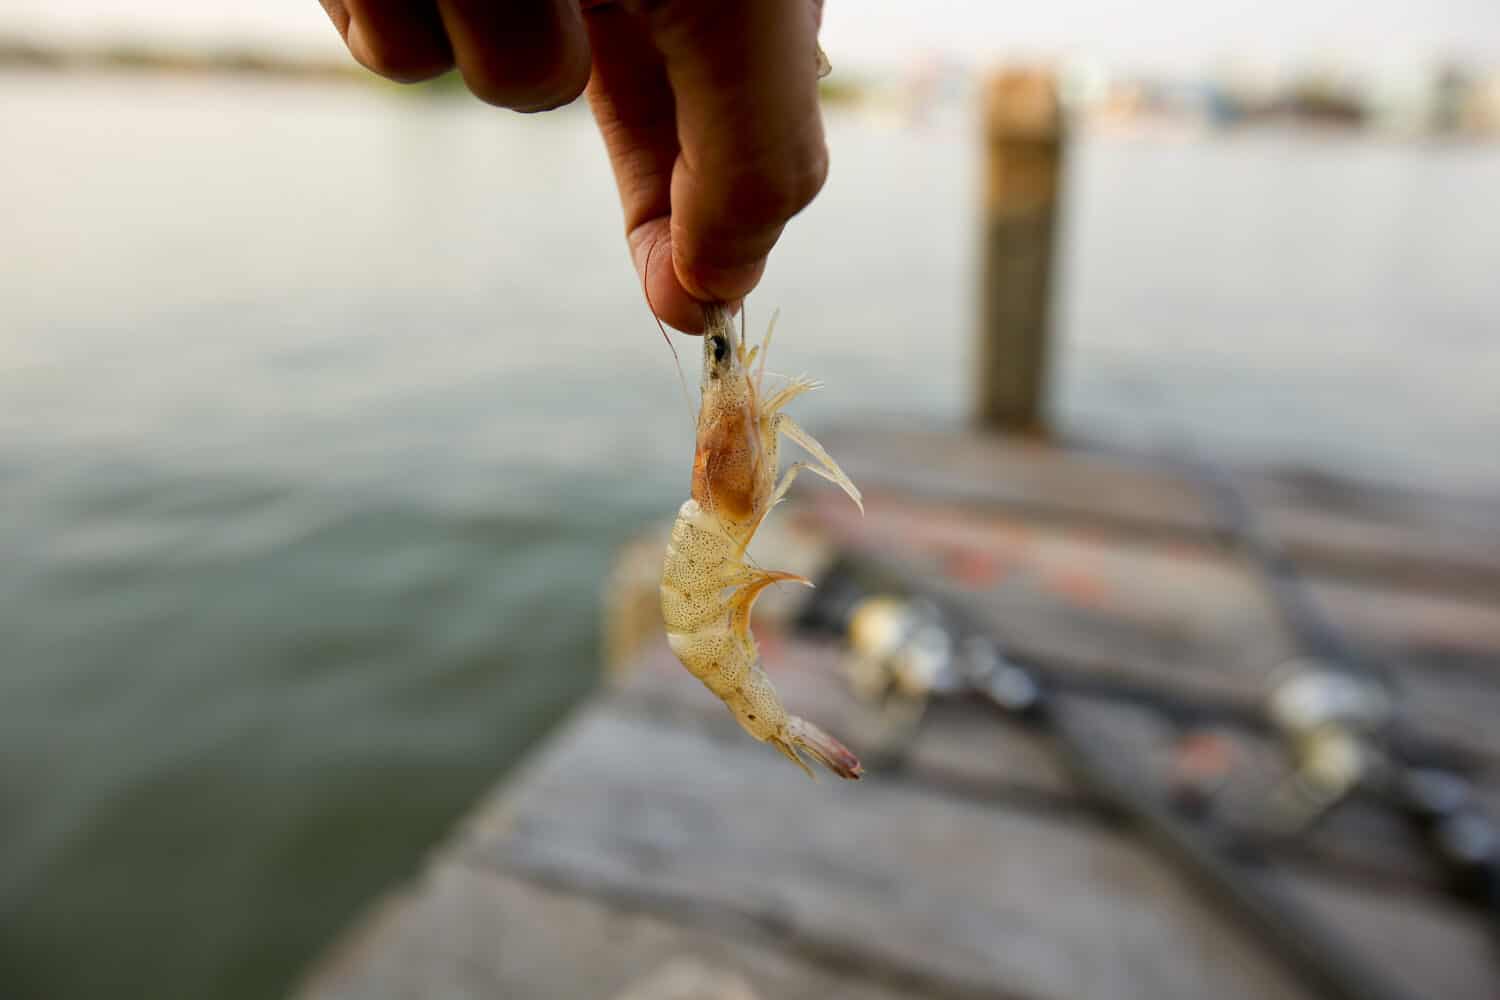 Small prawns are used as bait for fishing.